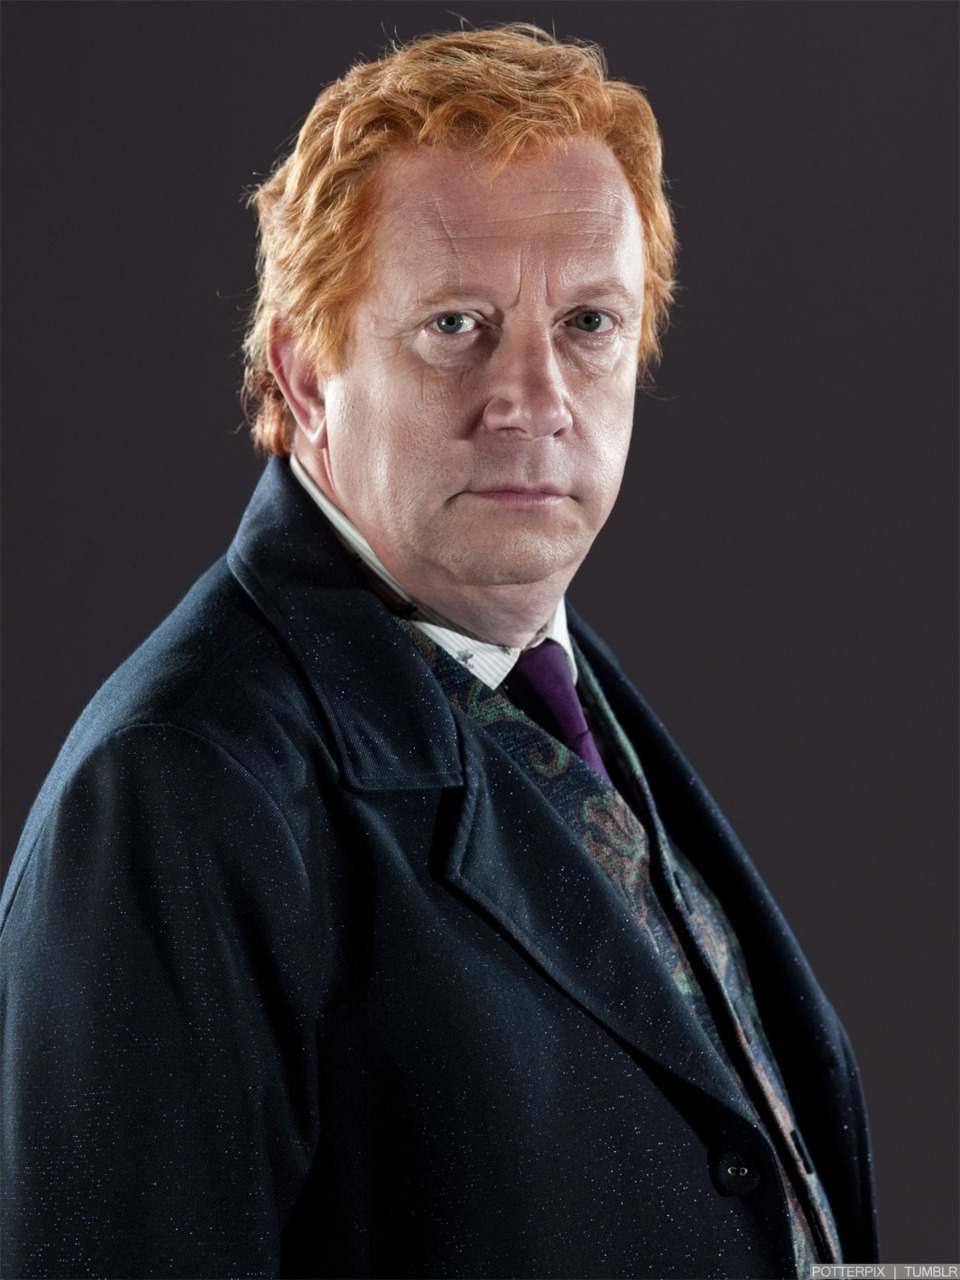 Who played Arthur Weasley in the Harry Potter series? 2